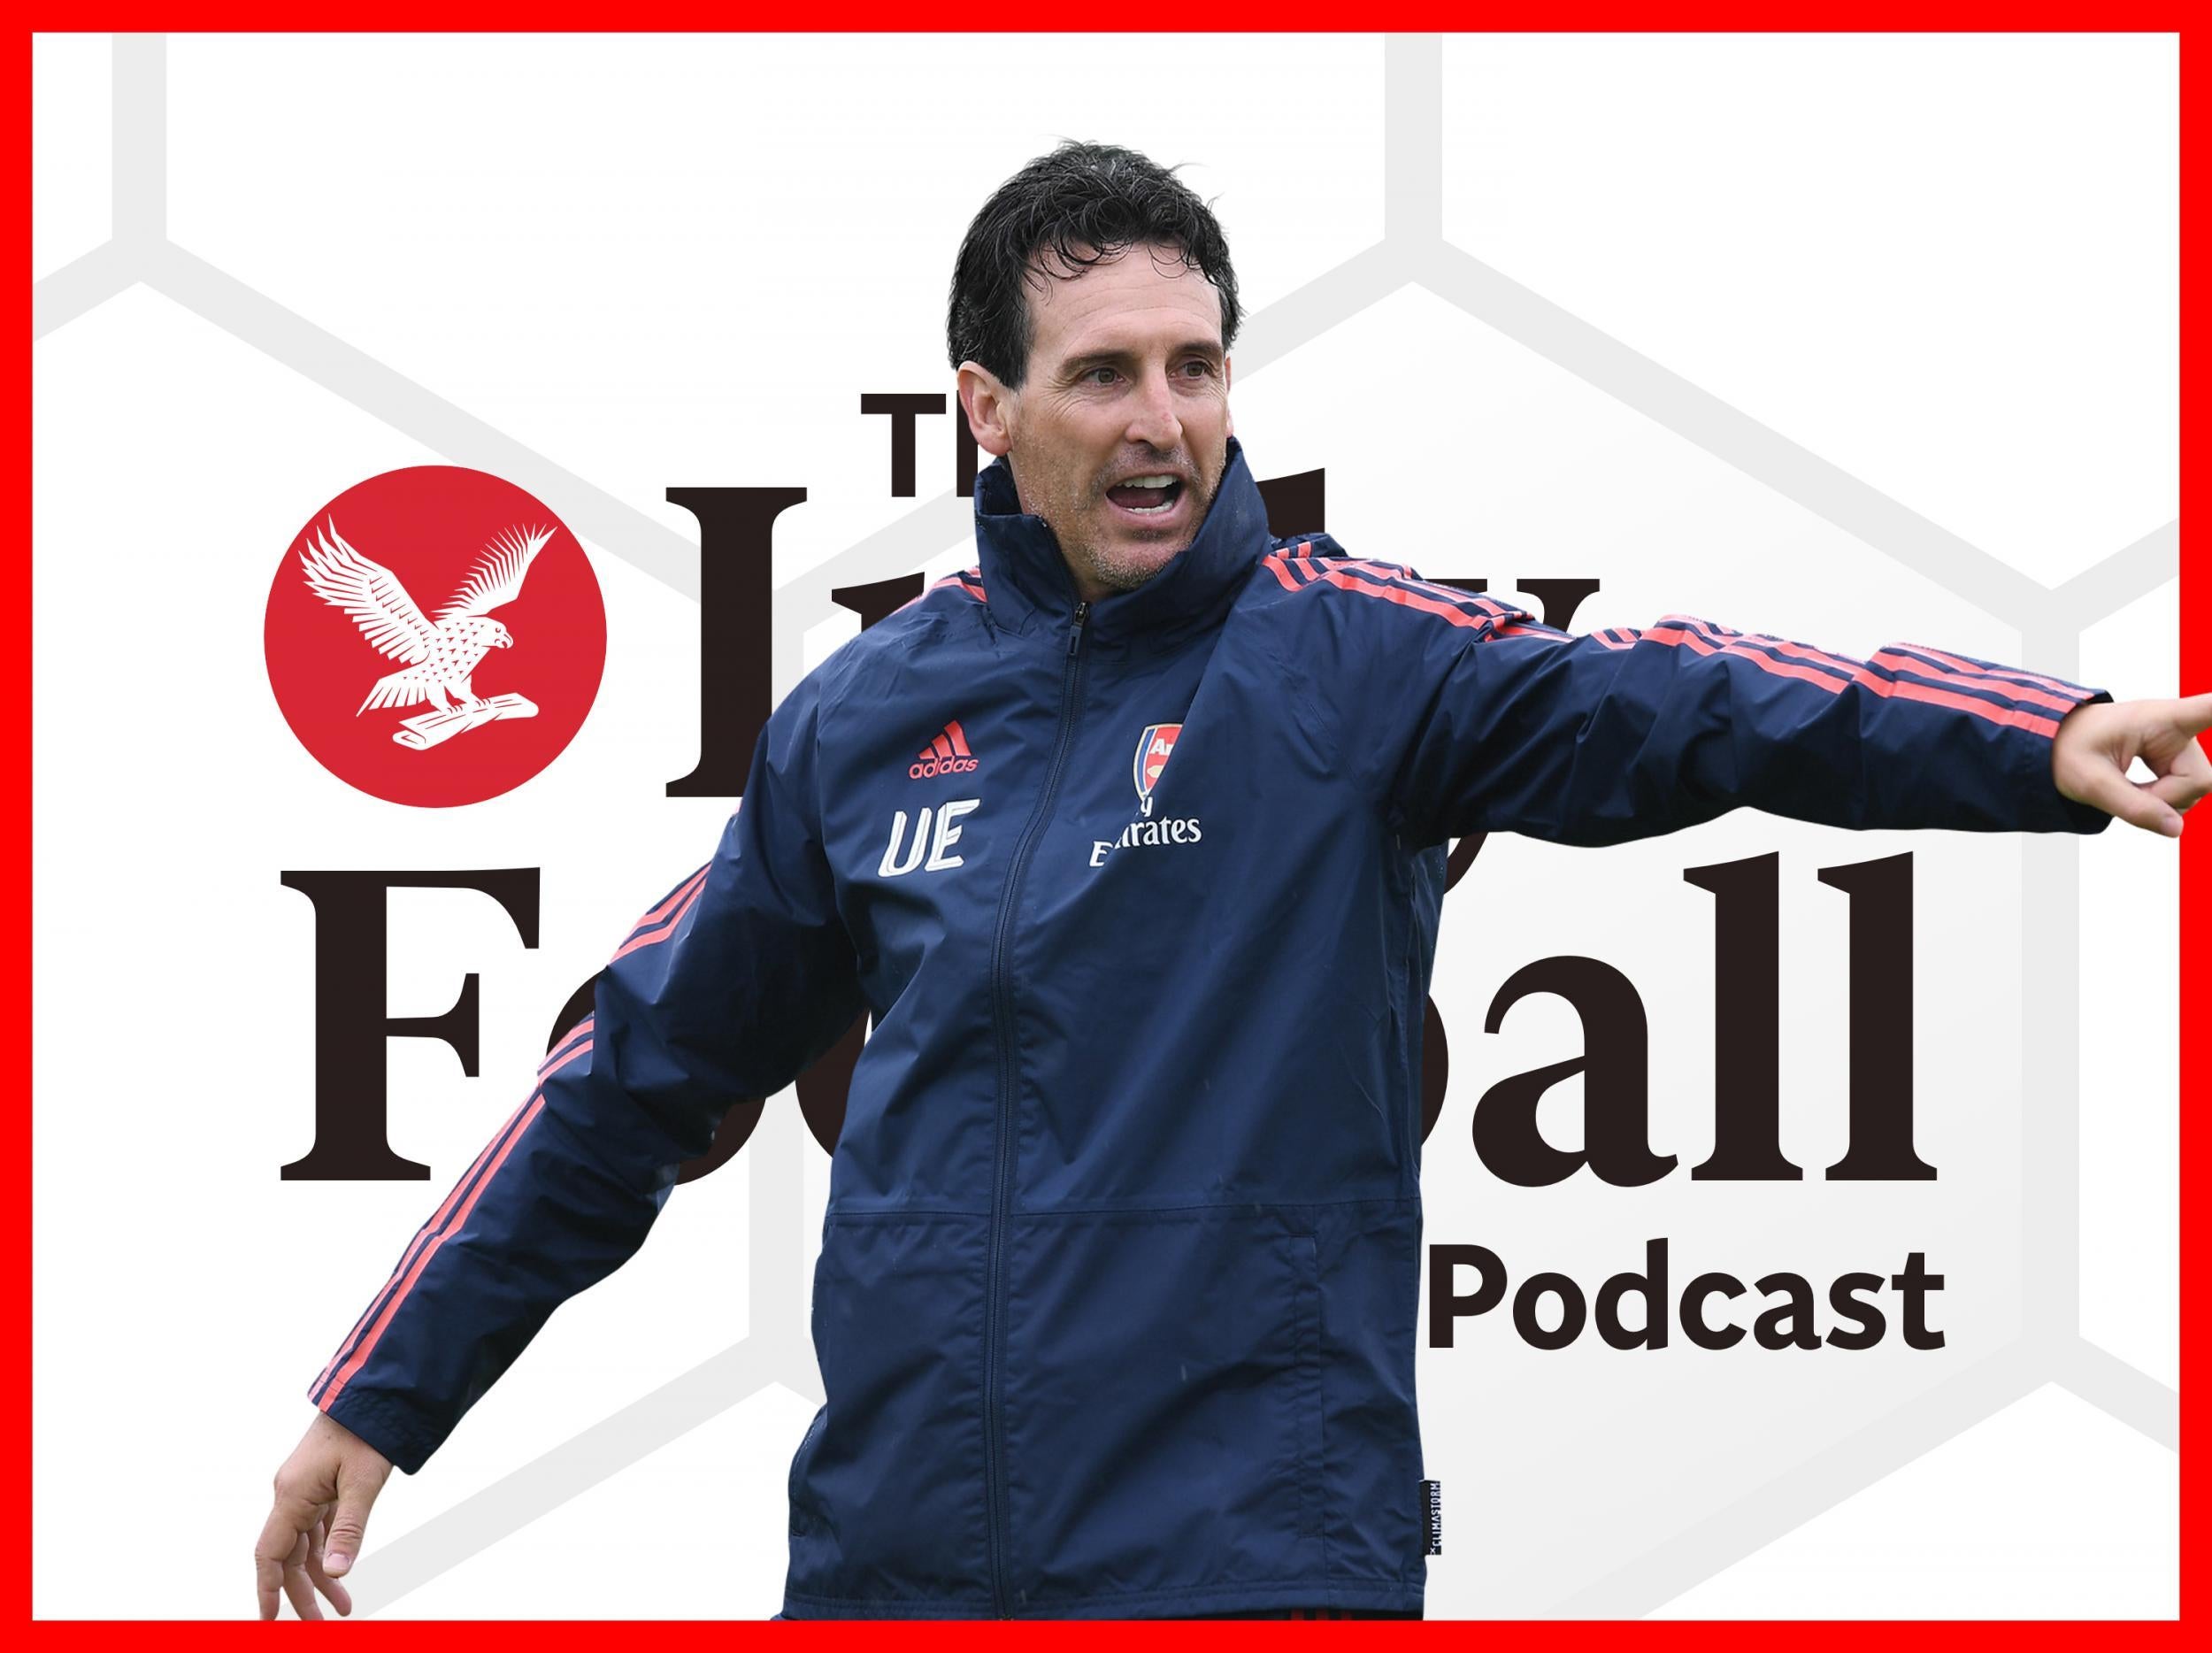 Download the latest episode of the Indy Football Podcast